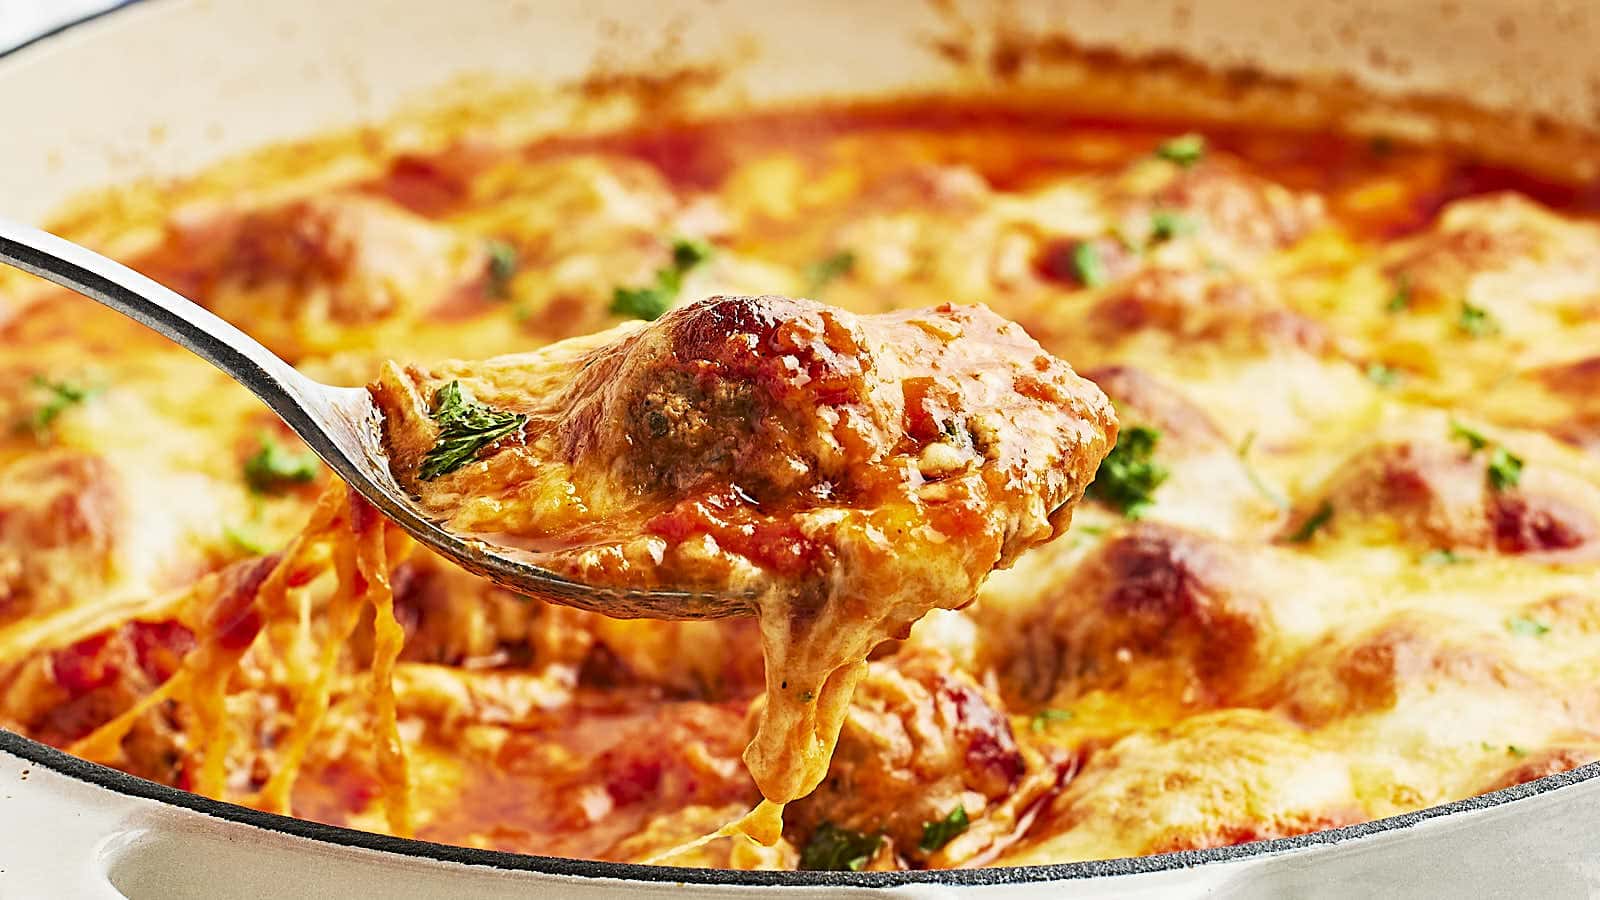 Cheesy Meatball Casserole recipe by Cheerful Cook.